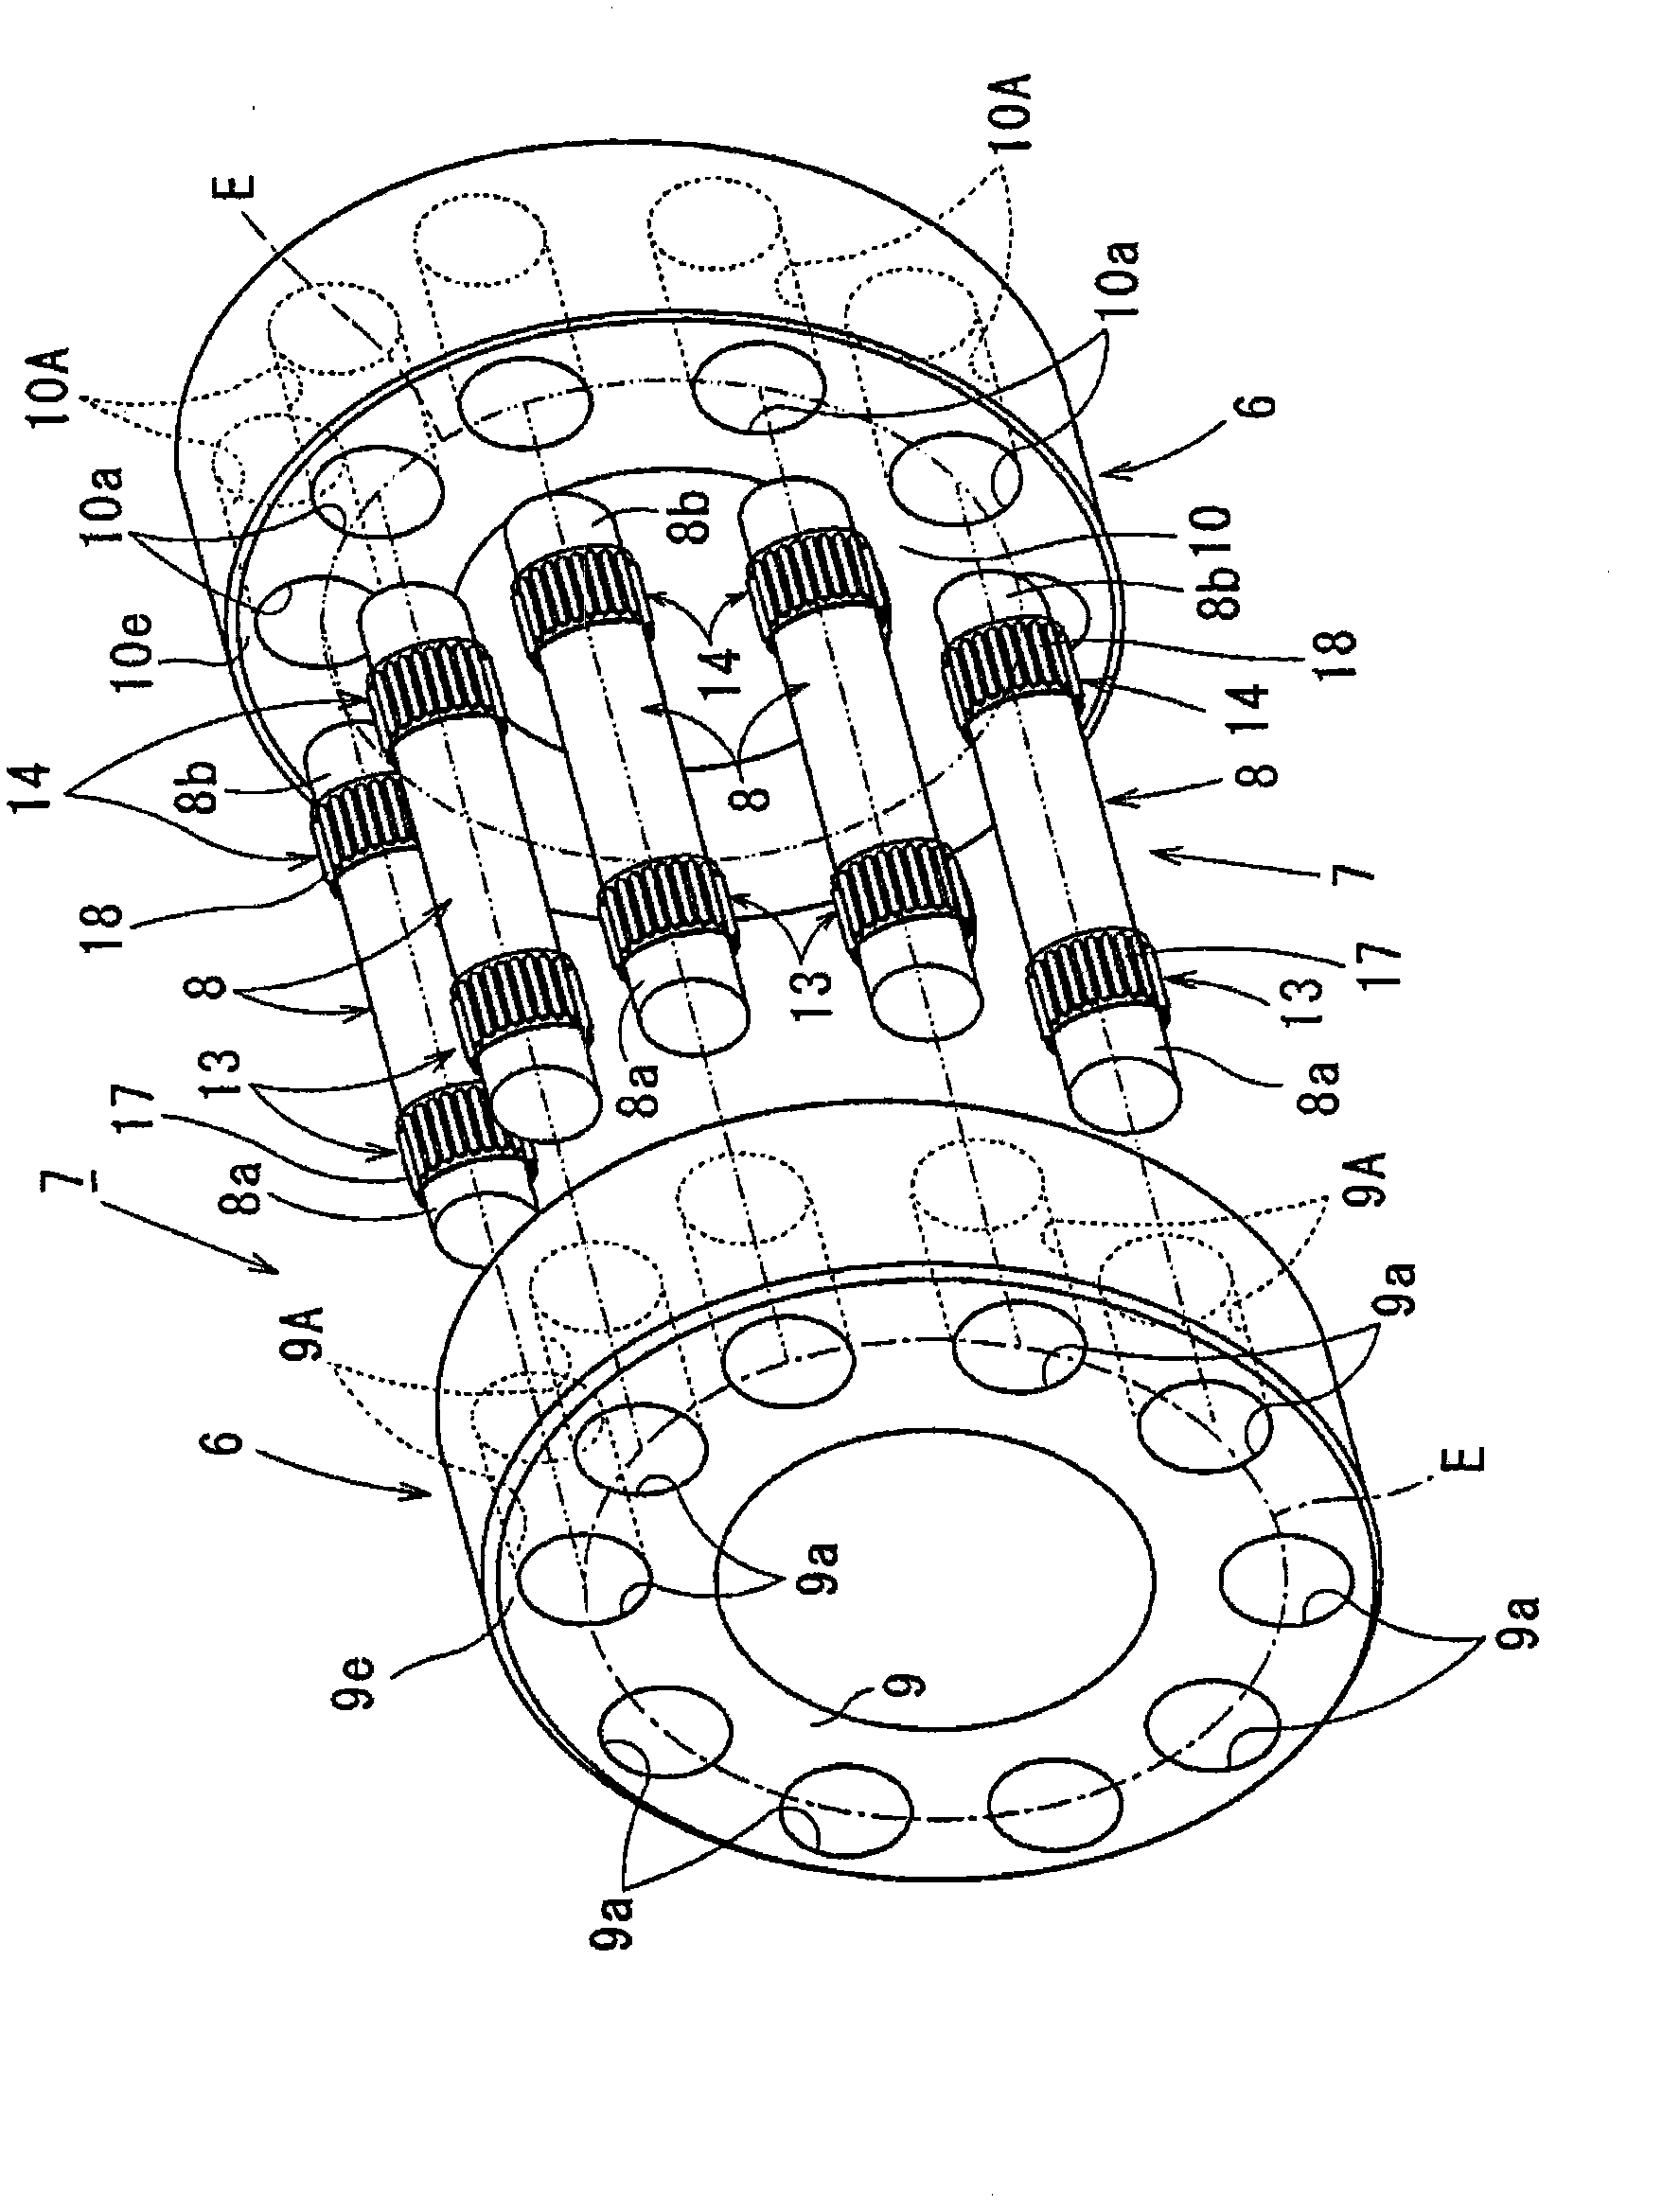 A pin roller type pinion device